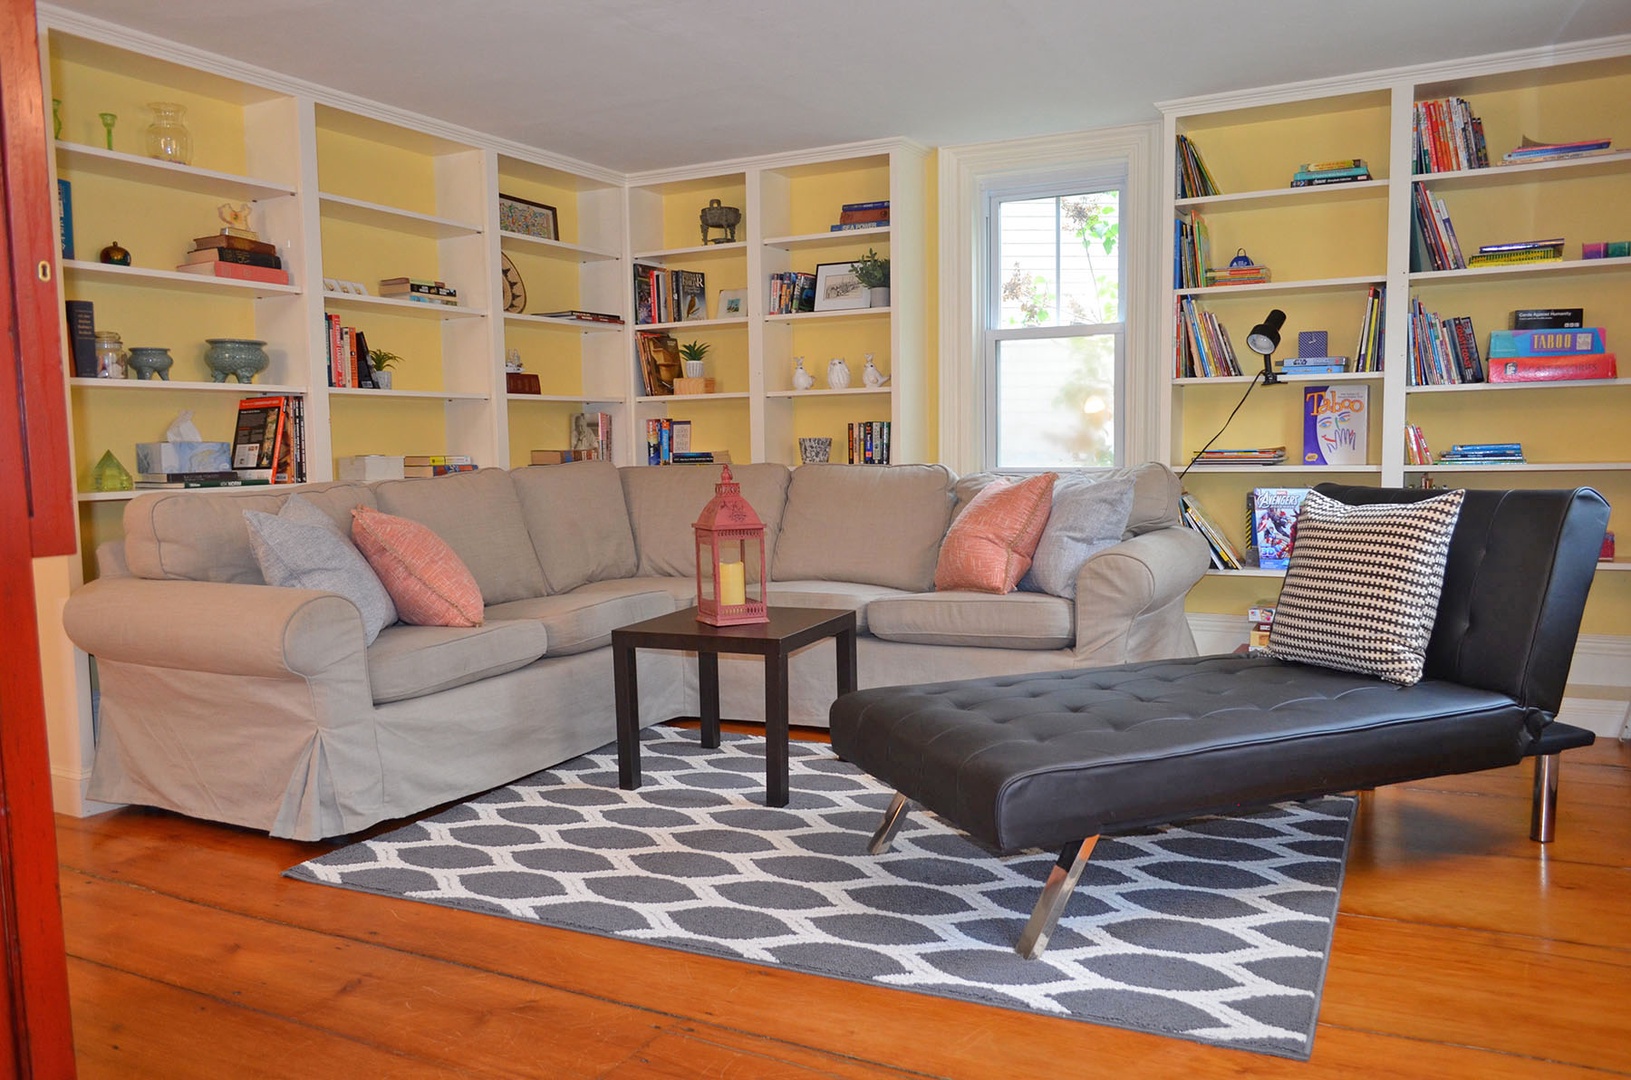 The den has comfortable seating and built-in bookshelves.